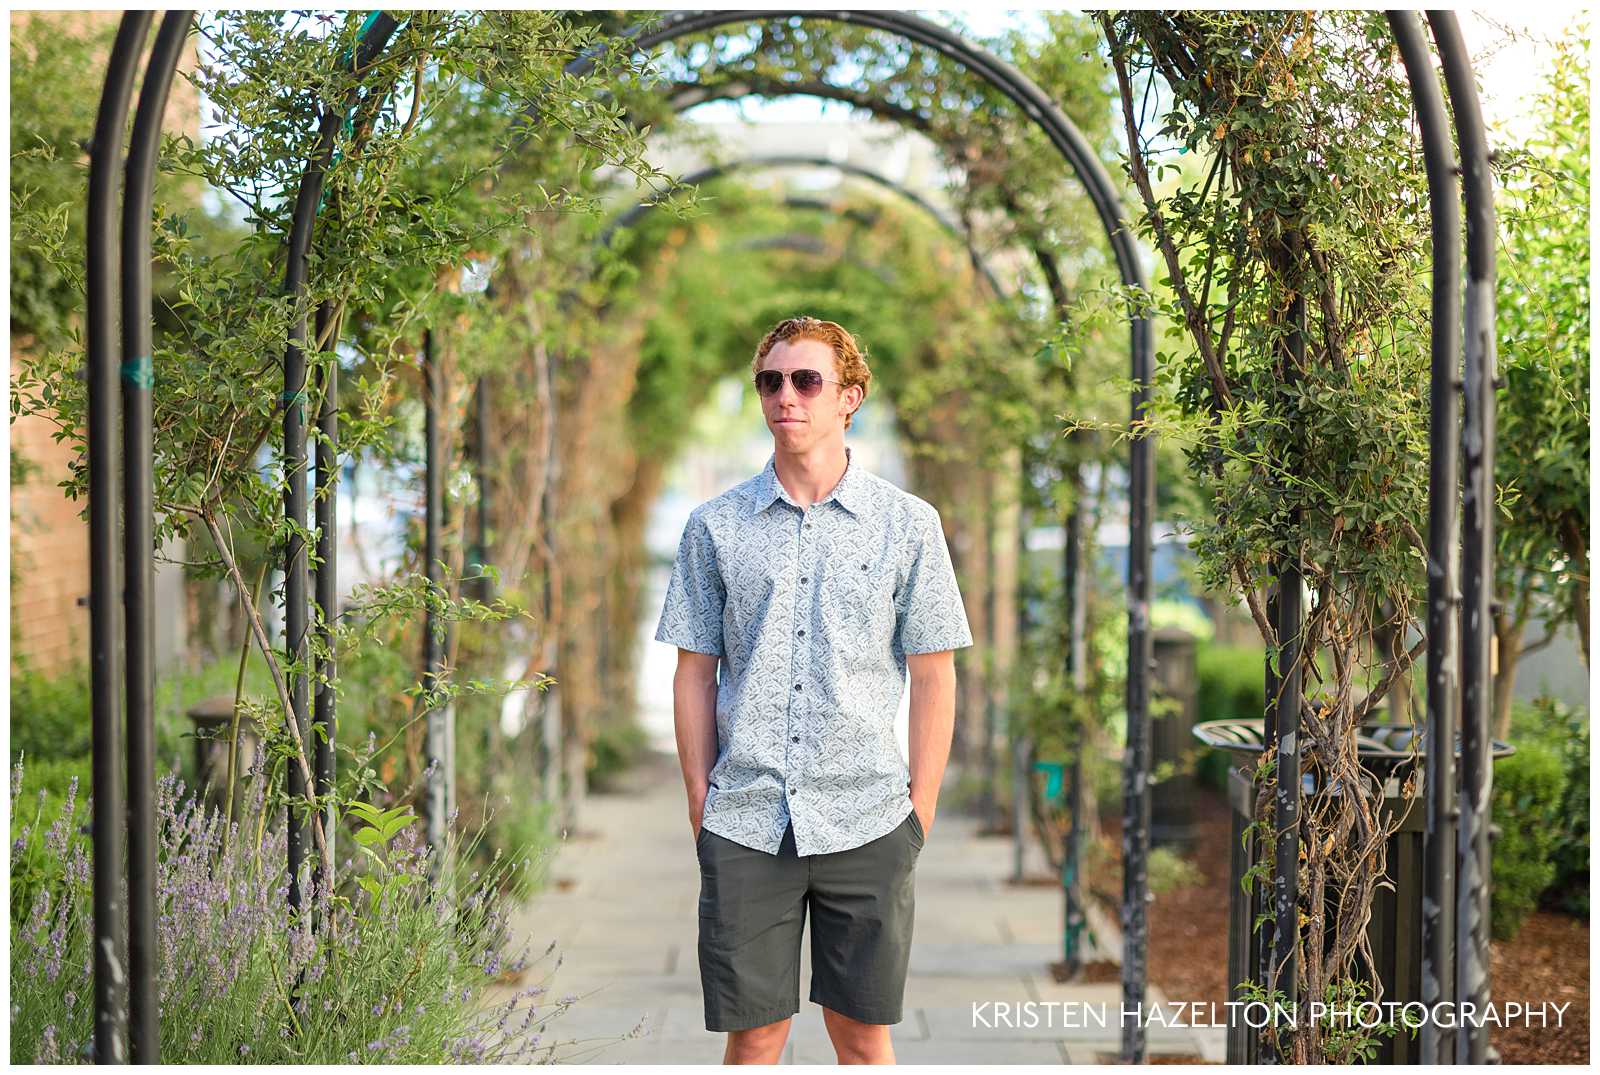 Male high school senior standing in the middle of an arbor walkway